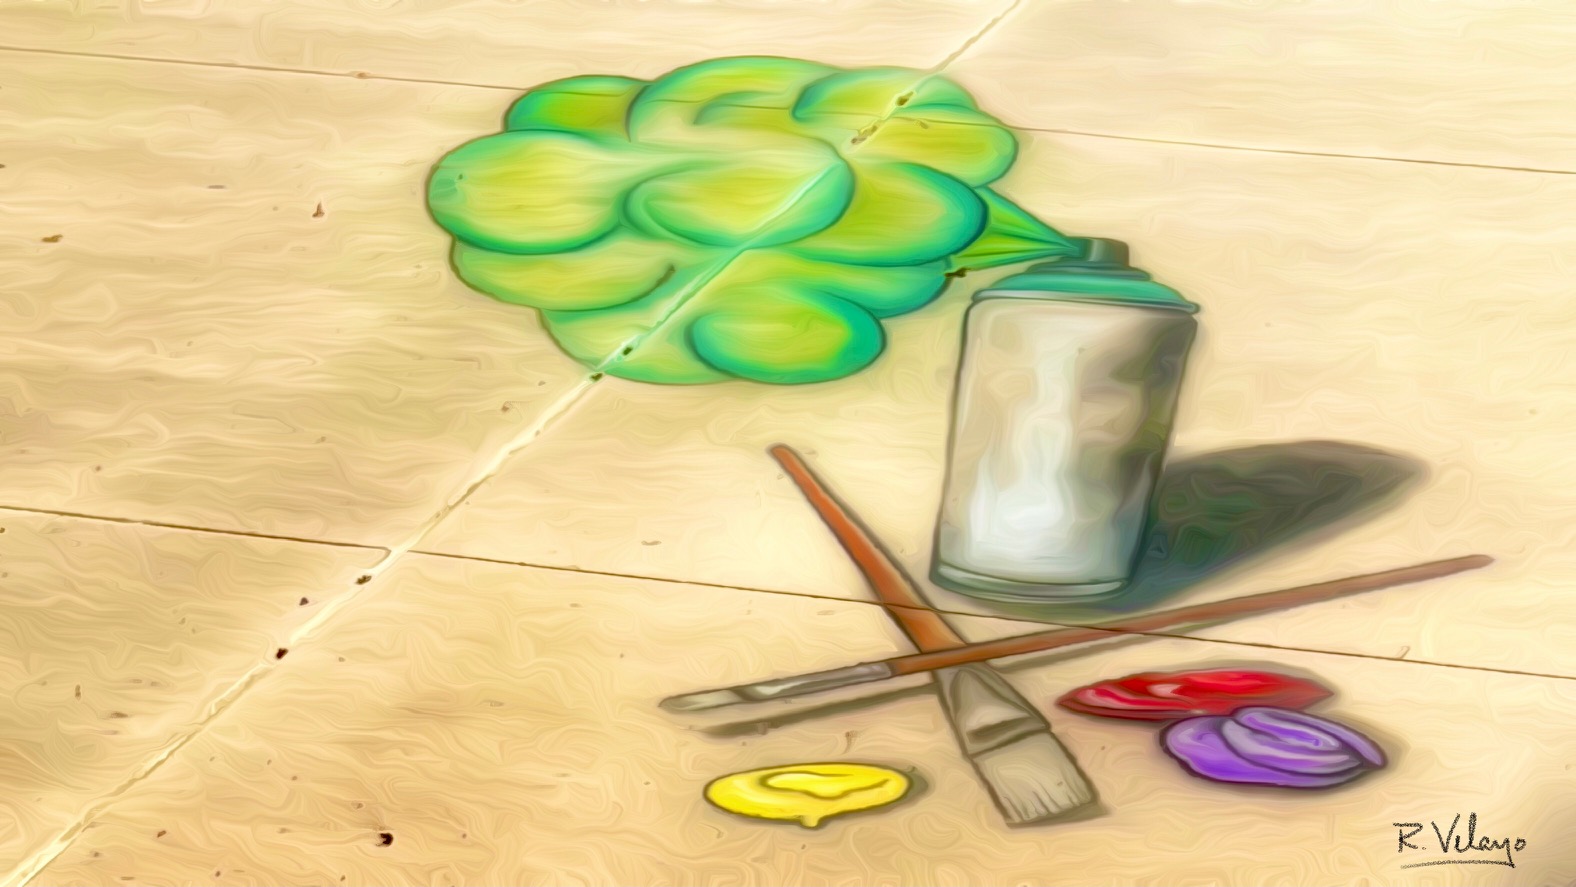 "SPRAY PAINT SUPPLIES DRAWN ON PAVEMENT" [Created: 7/31/2022]